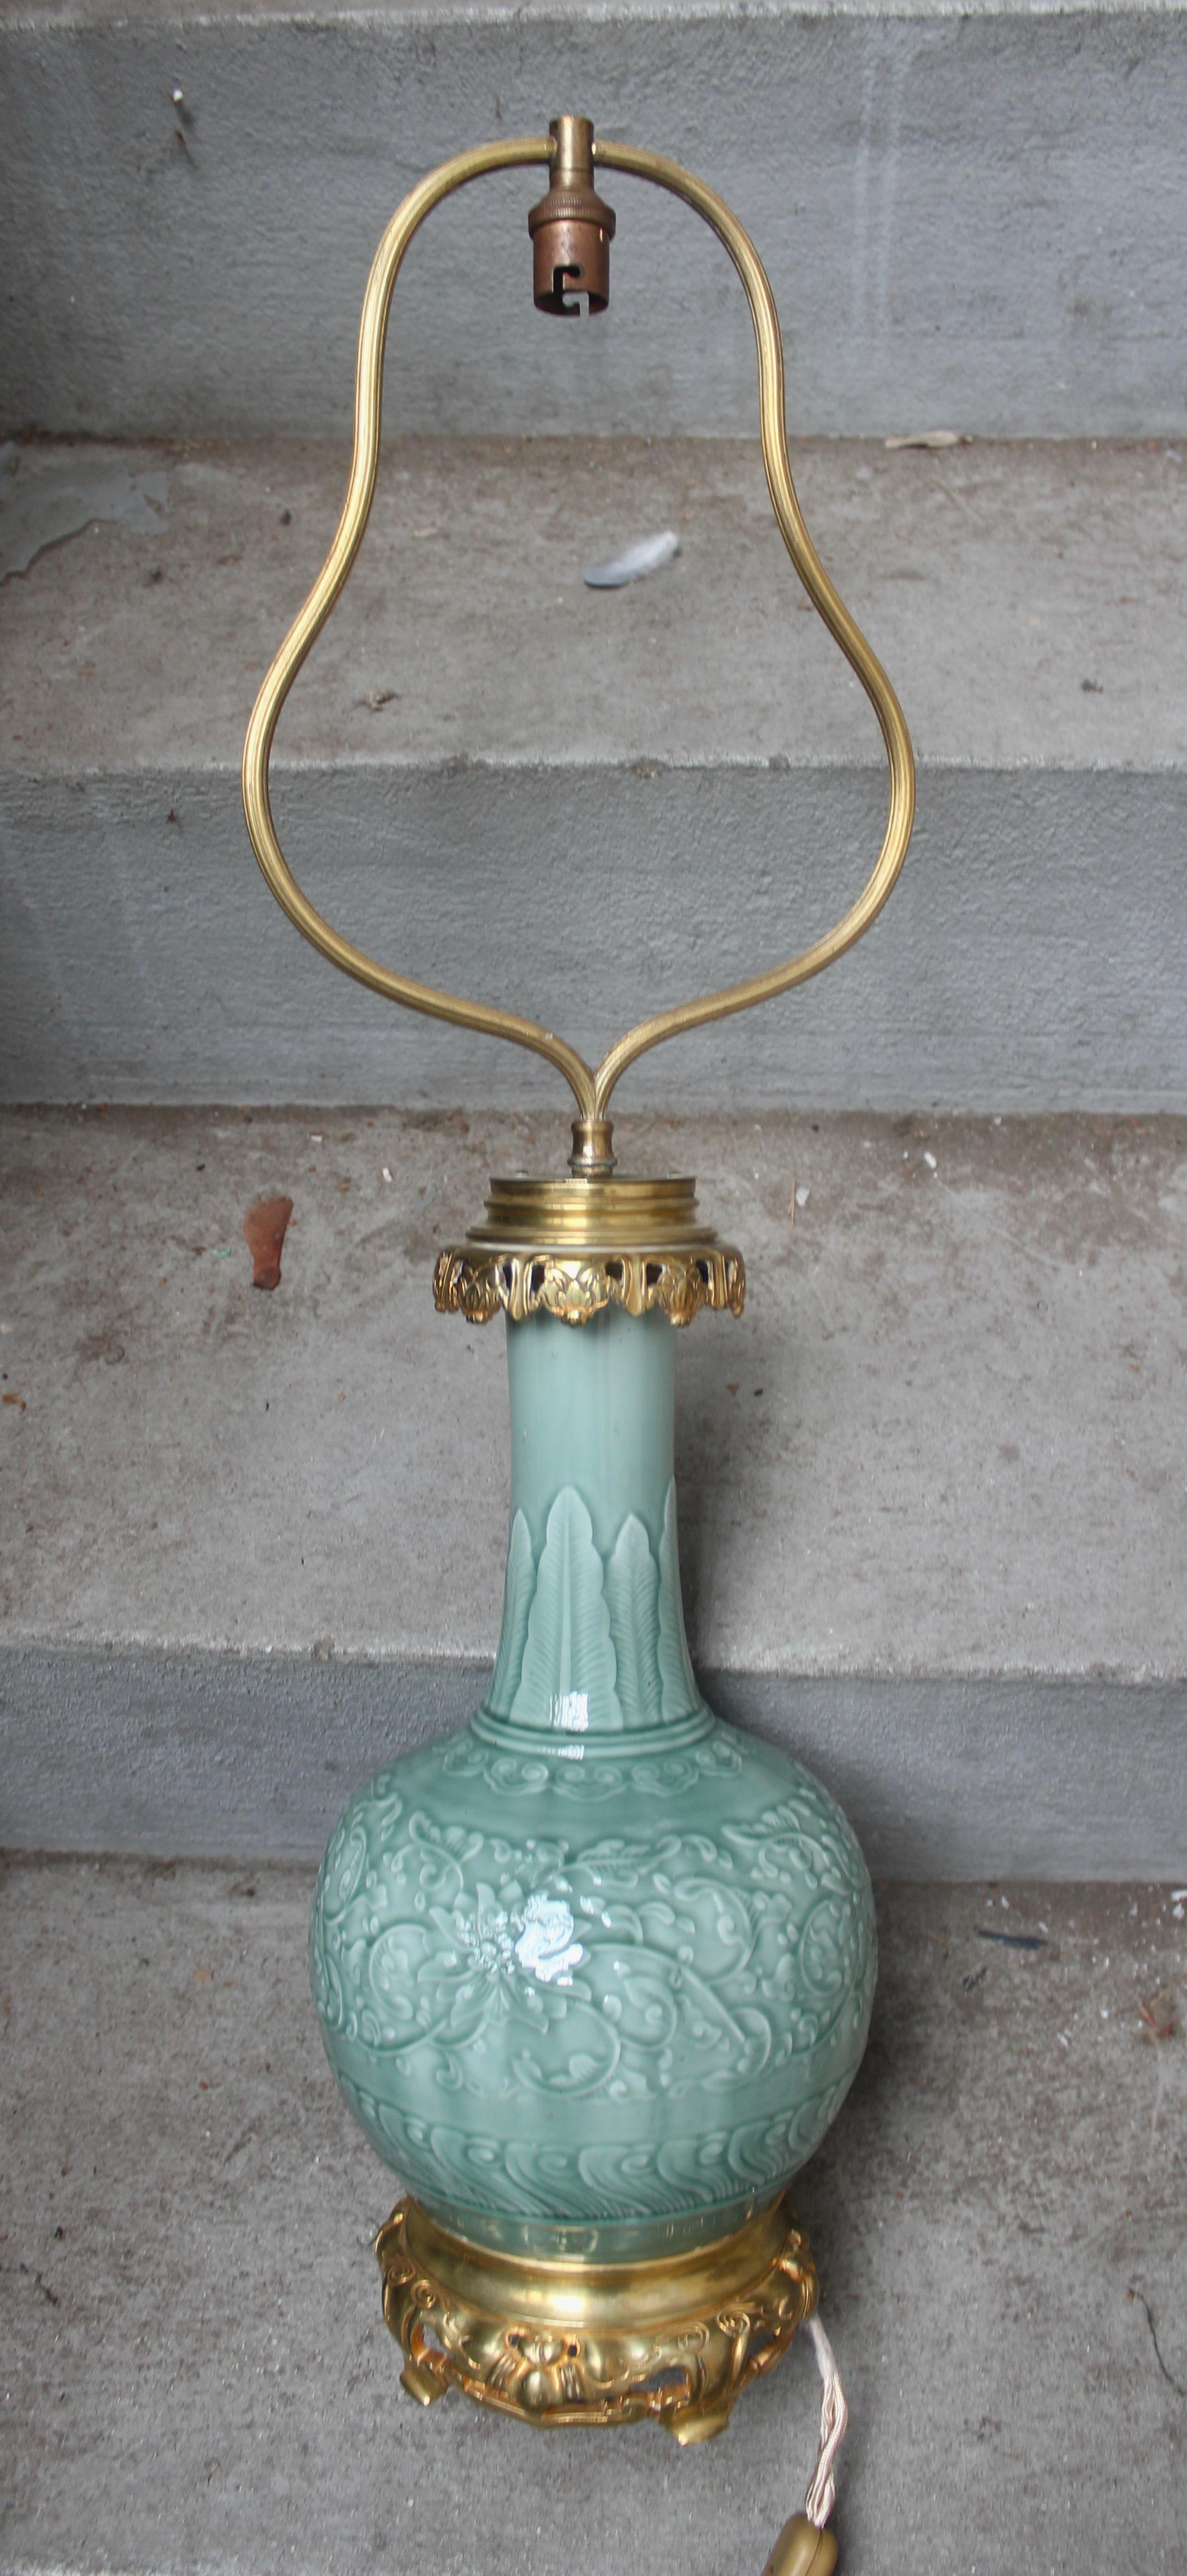 An ormolu-mounted Theodore Deck (1823-1891) celadon enameled faience vase mounted in table lamp,
circa 1880,
Bottle form, molded with scrolling lotus, the neck with stiff-leaf tips,
Fitment with plaque Gagneau / 115 / R. Lafayette
Shade